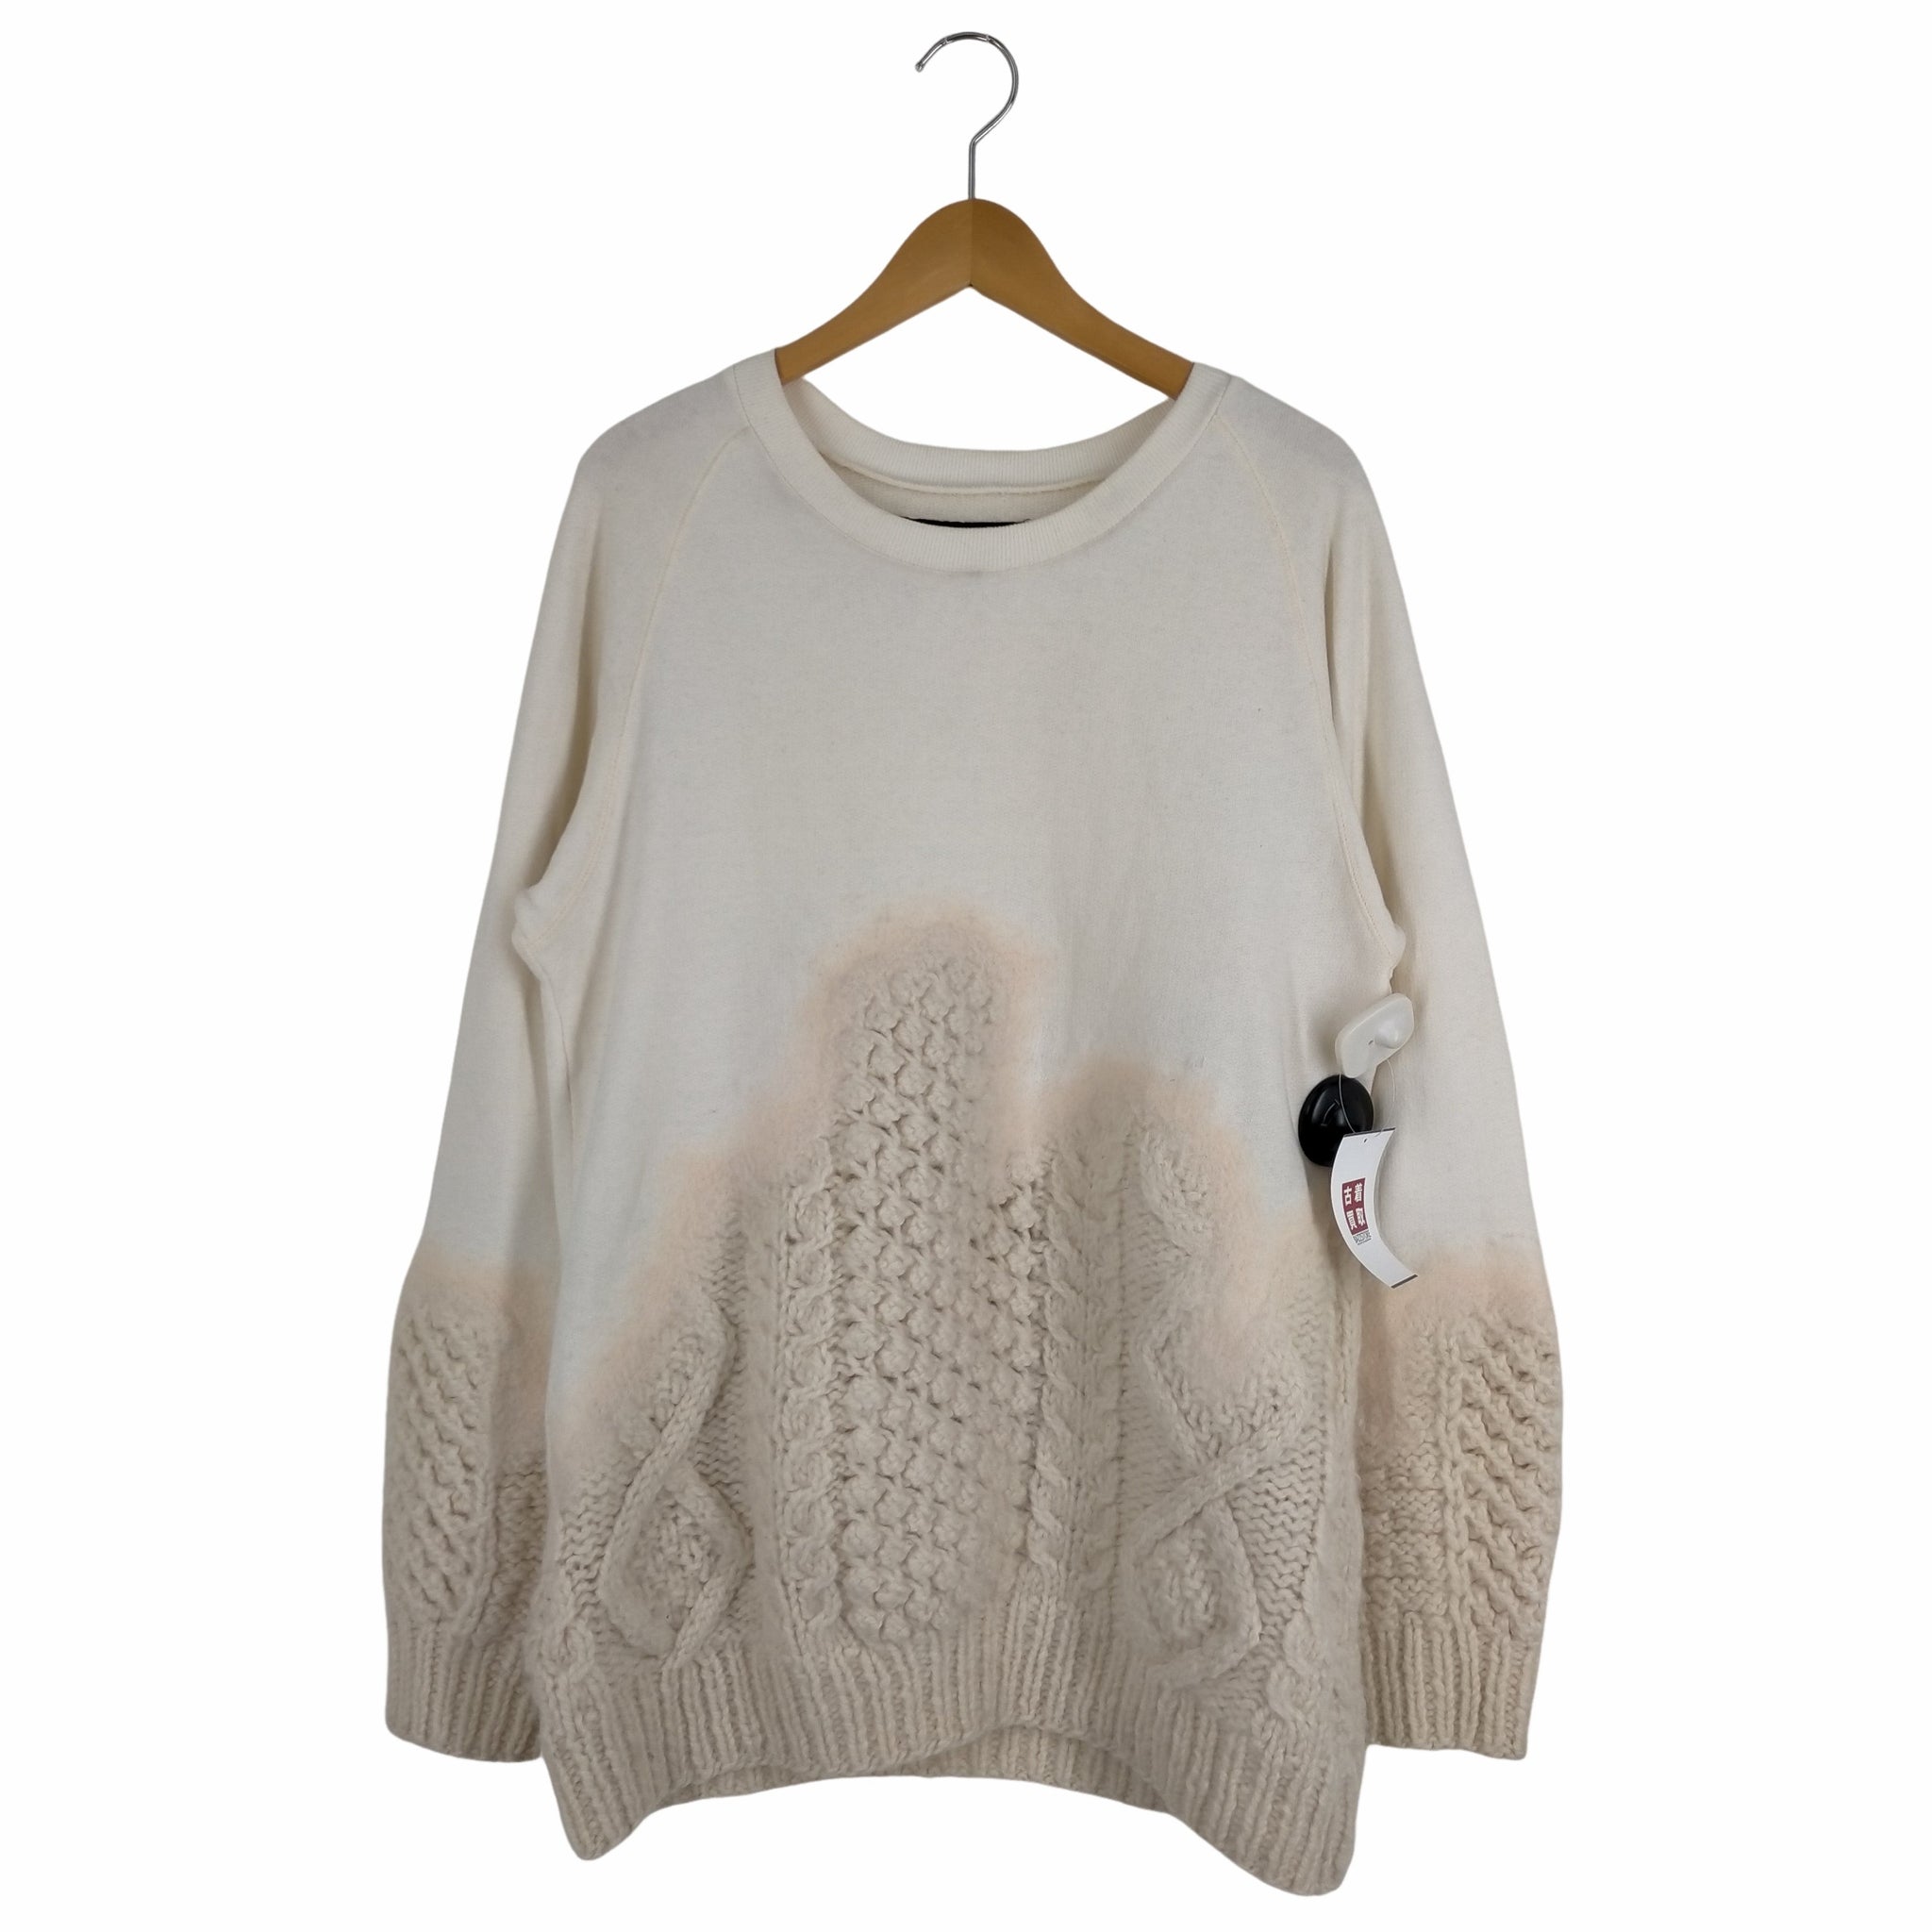 TALKING ABOUT THE ABSTRACTION(トーキングアバウトザアブストラクション)Knit Fusion Sweat